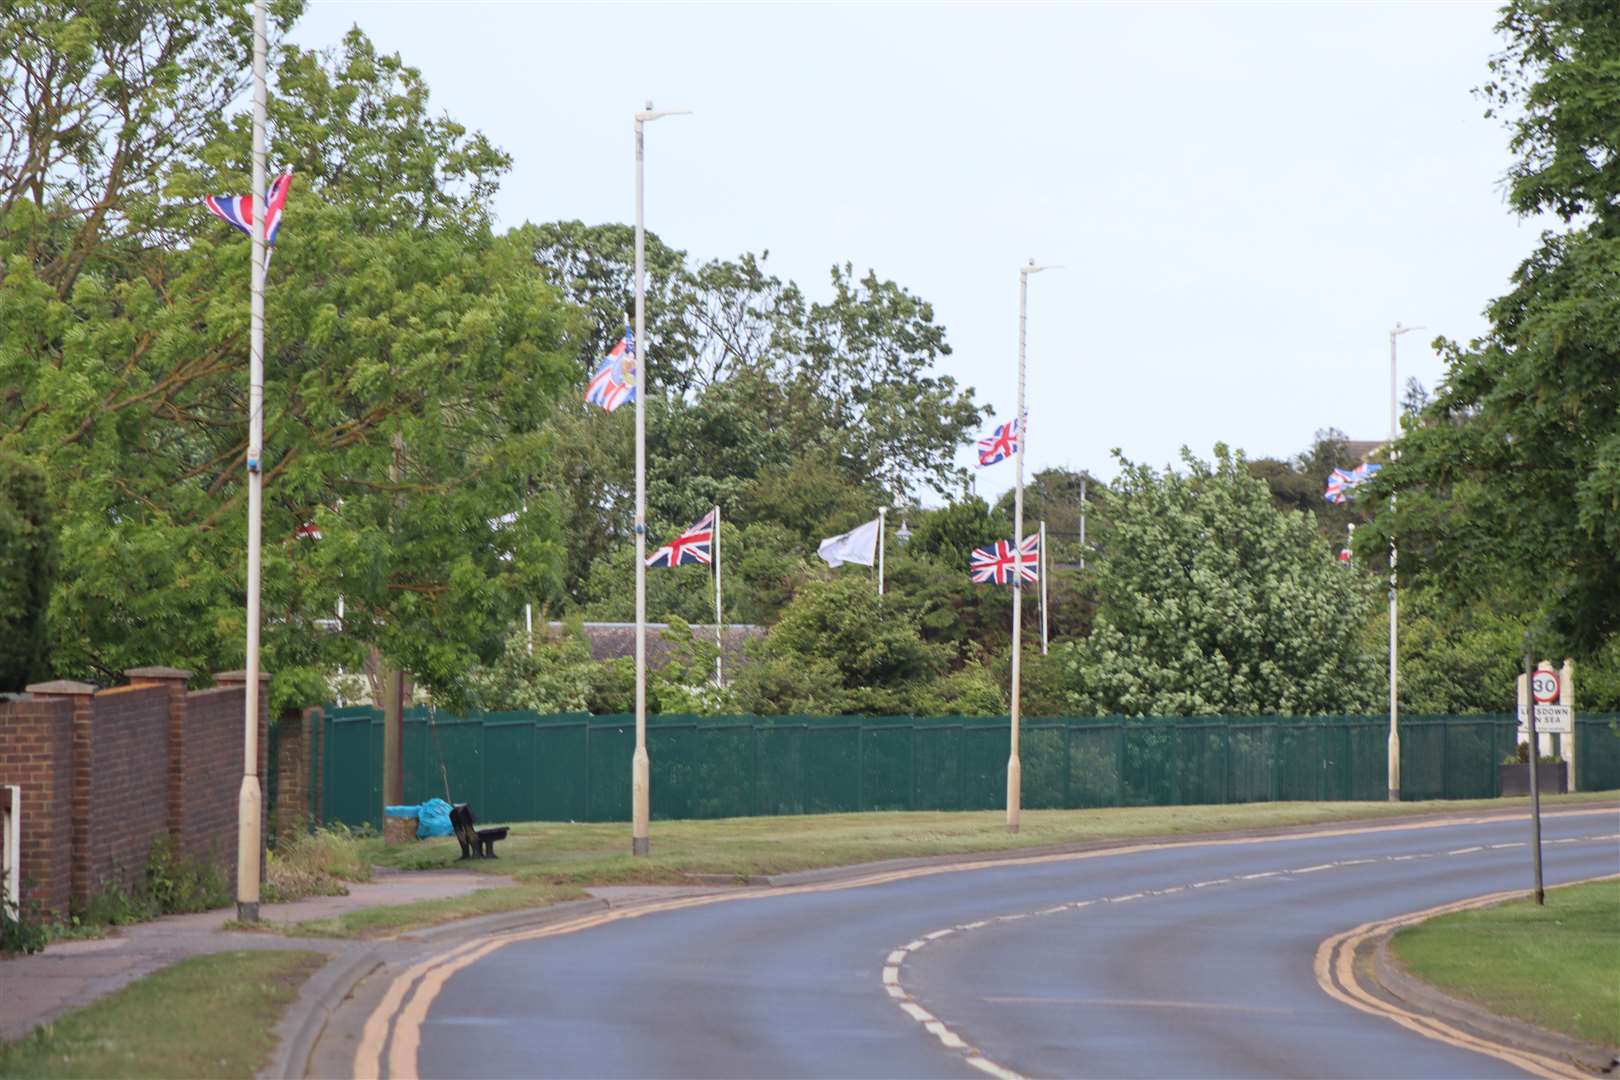 Flags are flying from Leysdown lampposts for the Queen's Platinum Jubilee